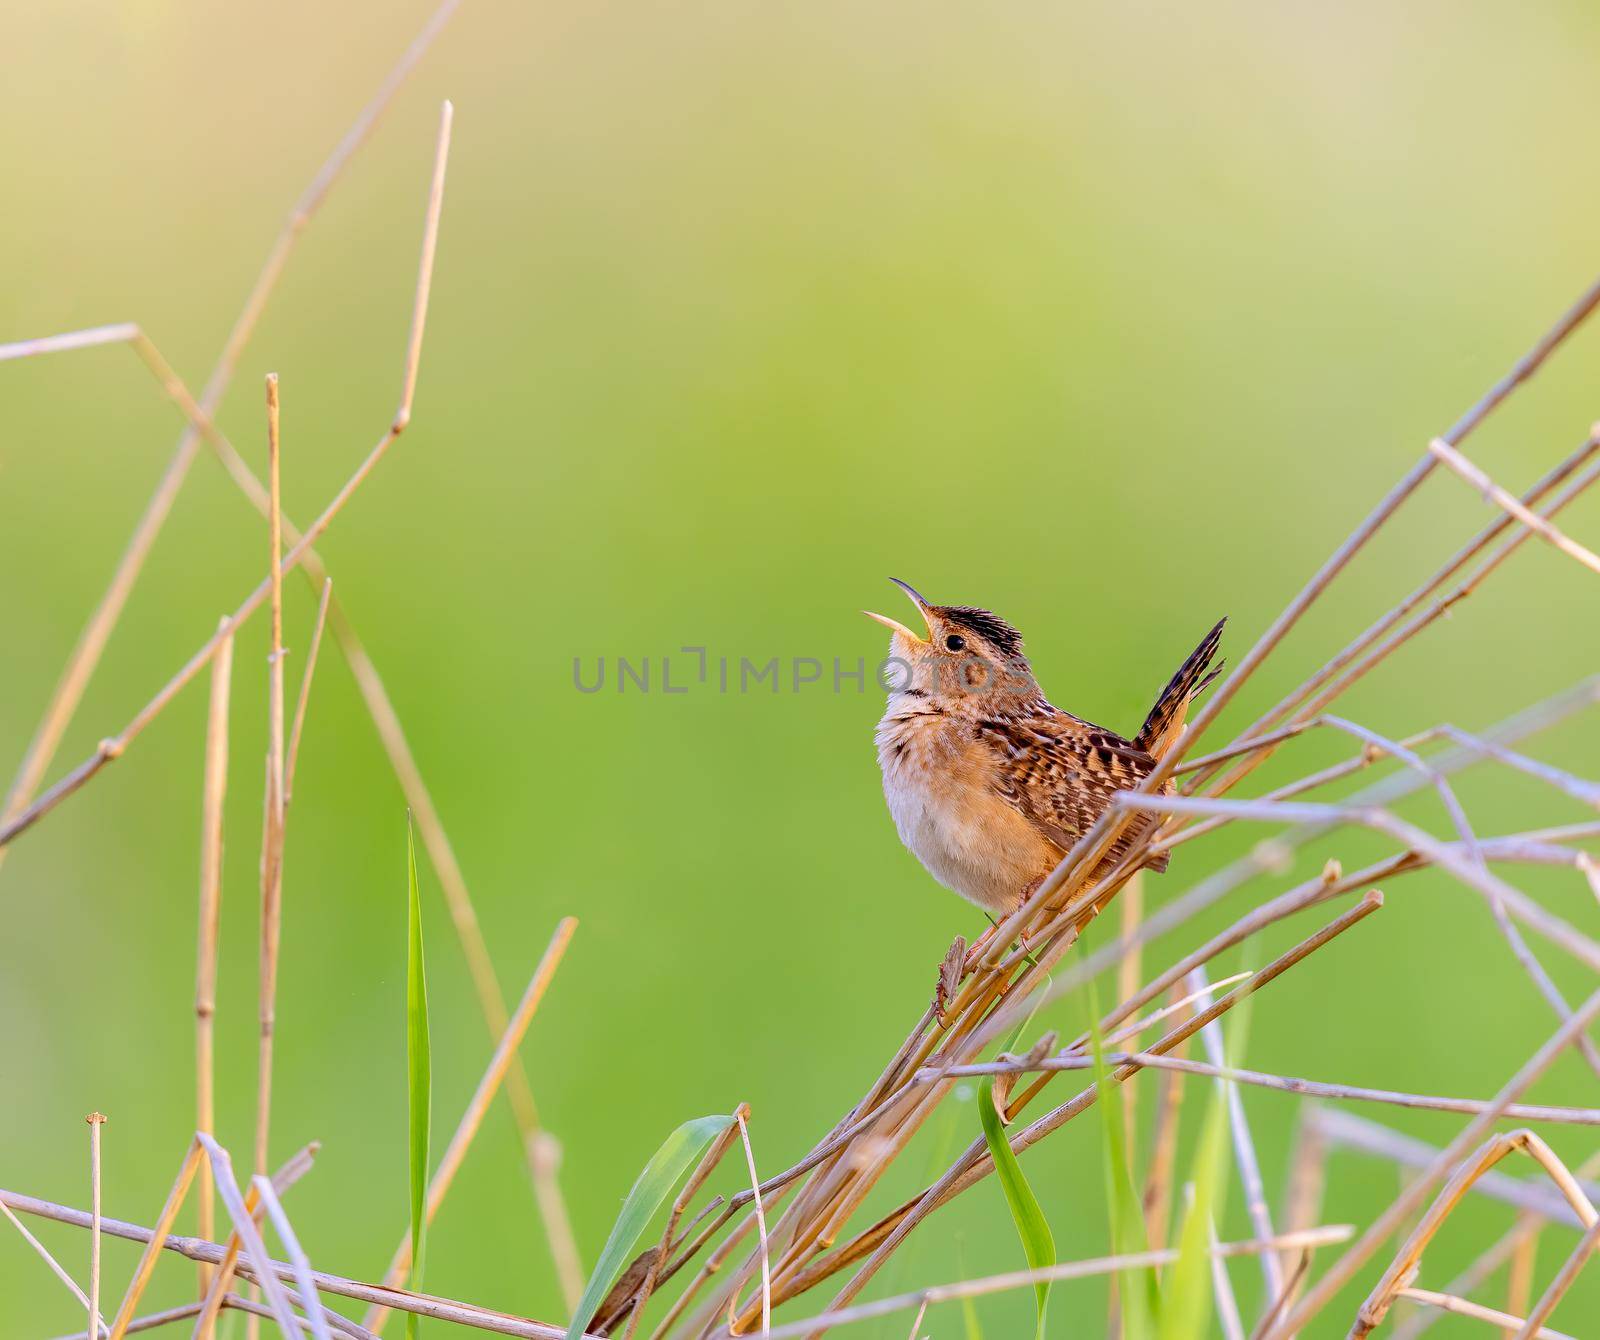 Sedge wren singing its heart out at dawn in Michigan